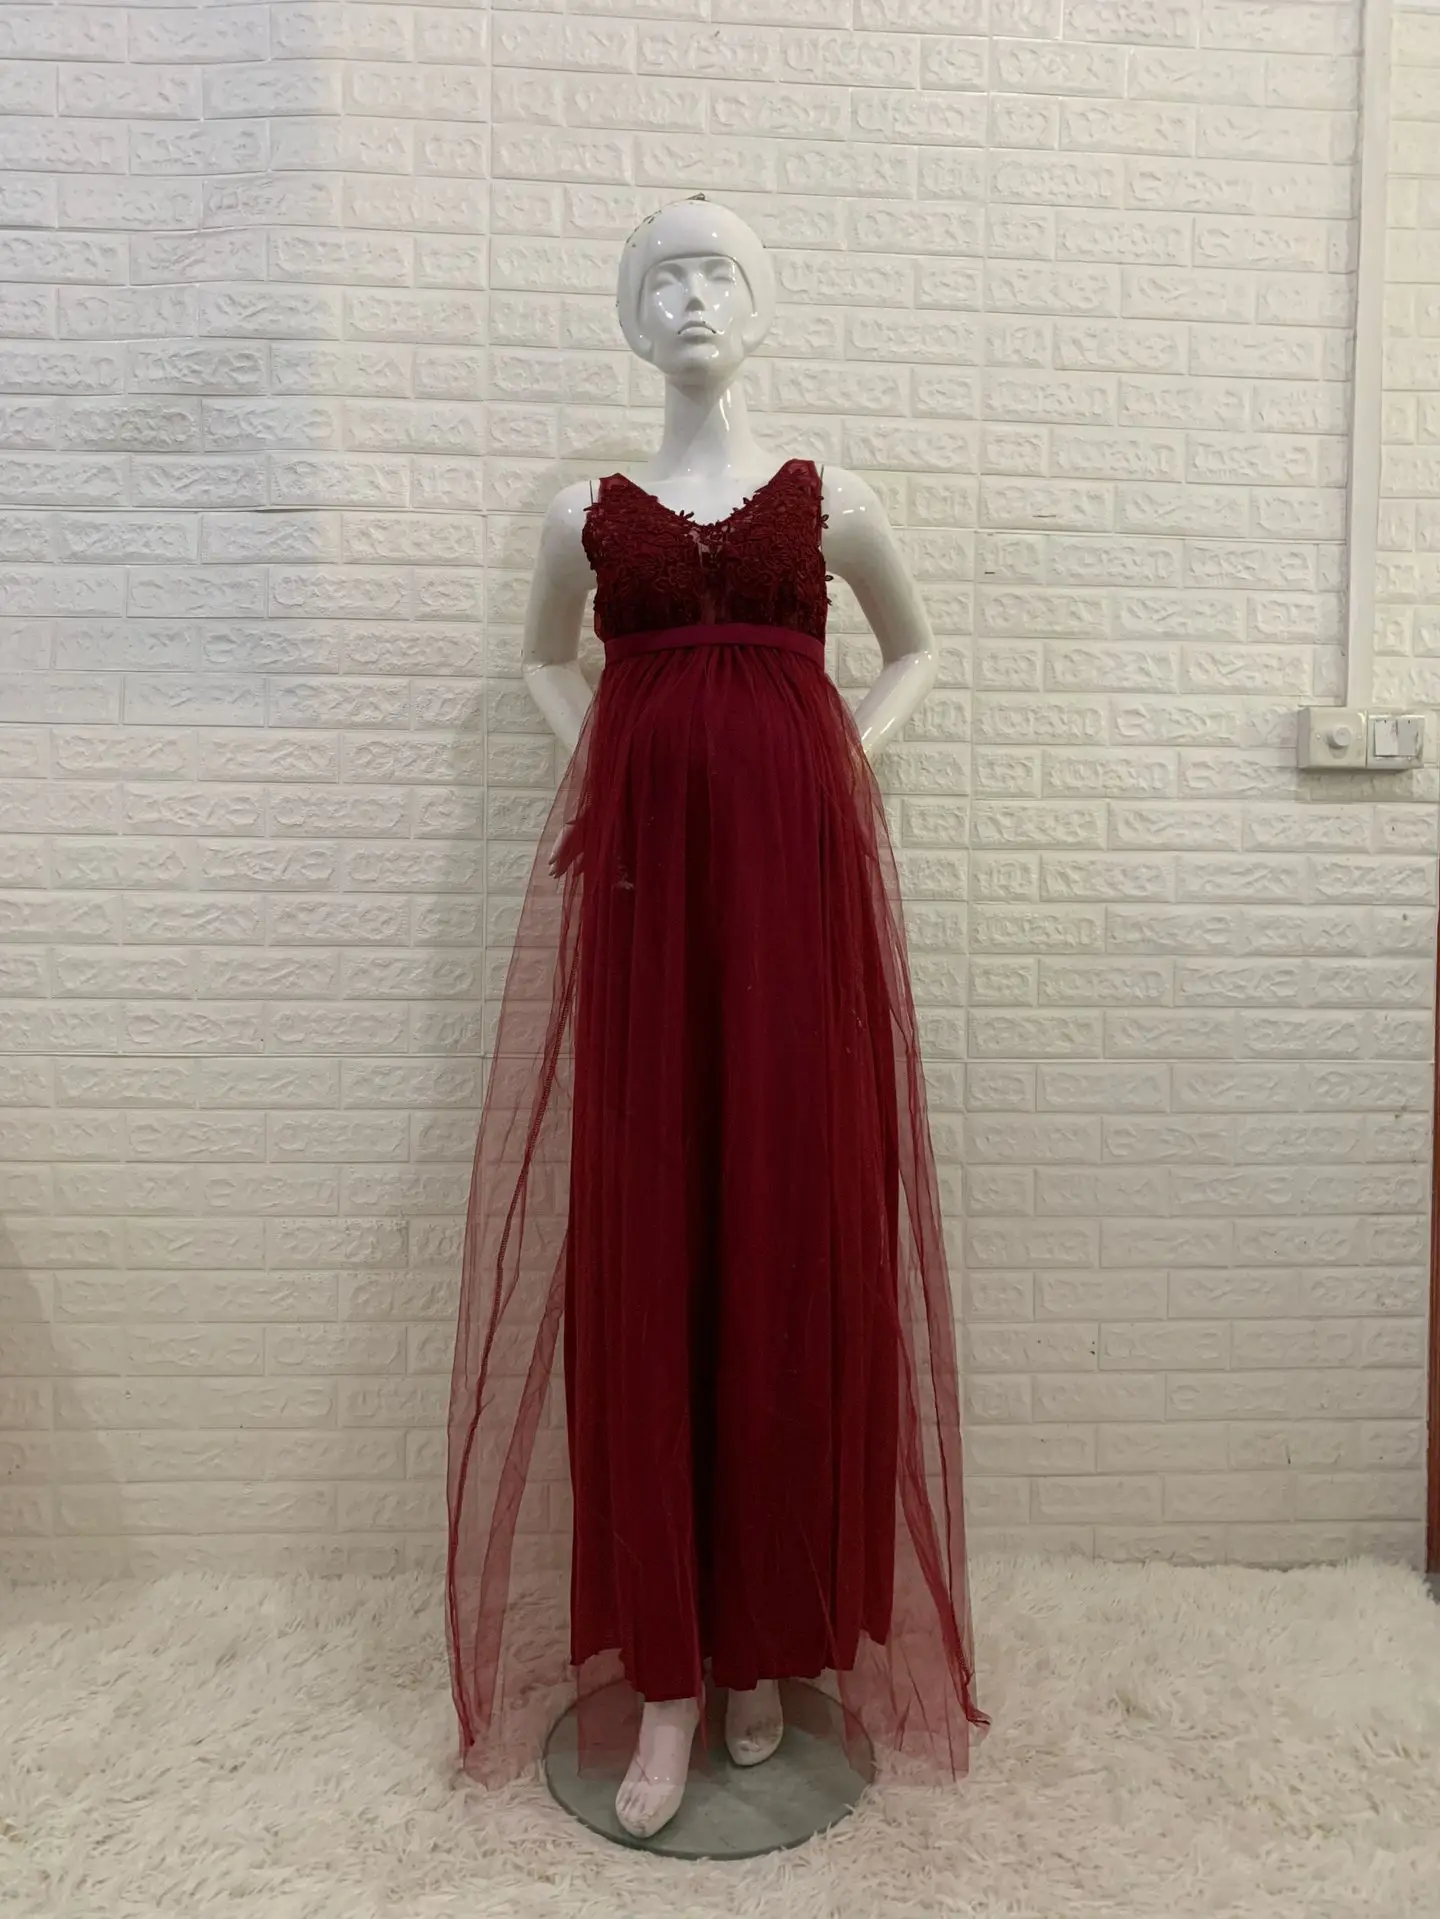 

Sleeveless Maternity Photo Dress For Pregnant Tulle Woman's Evening Dress Long Pregnancy Shooting Dress Women Photography Gown